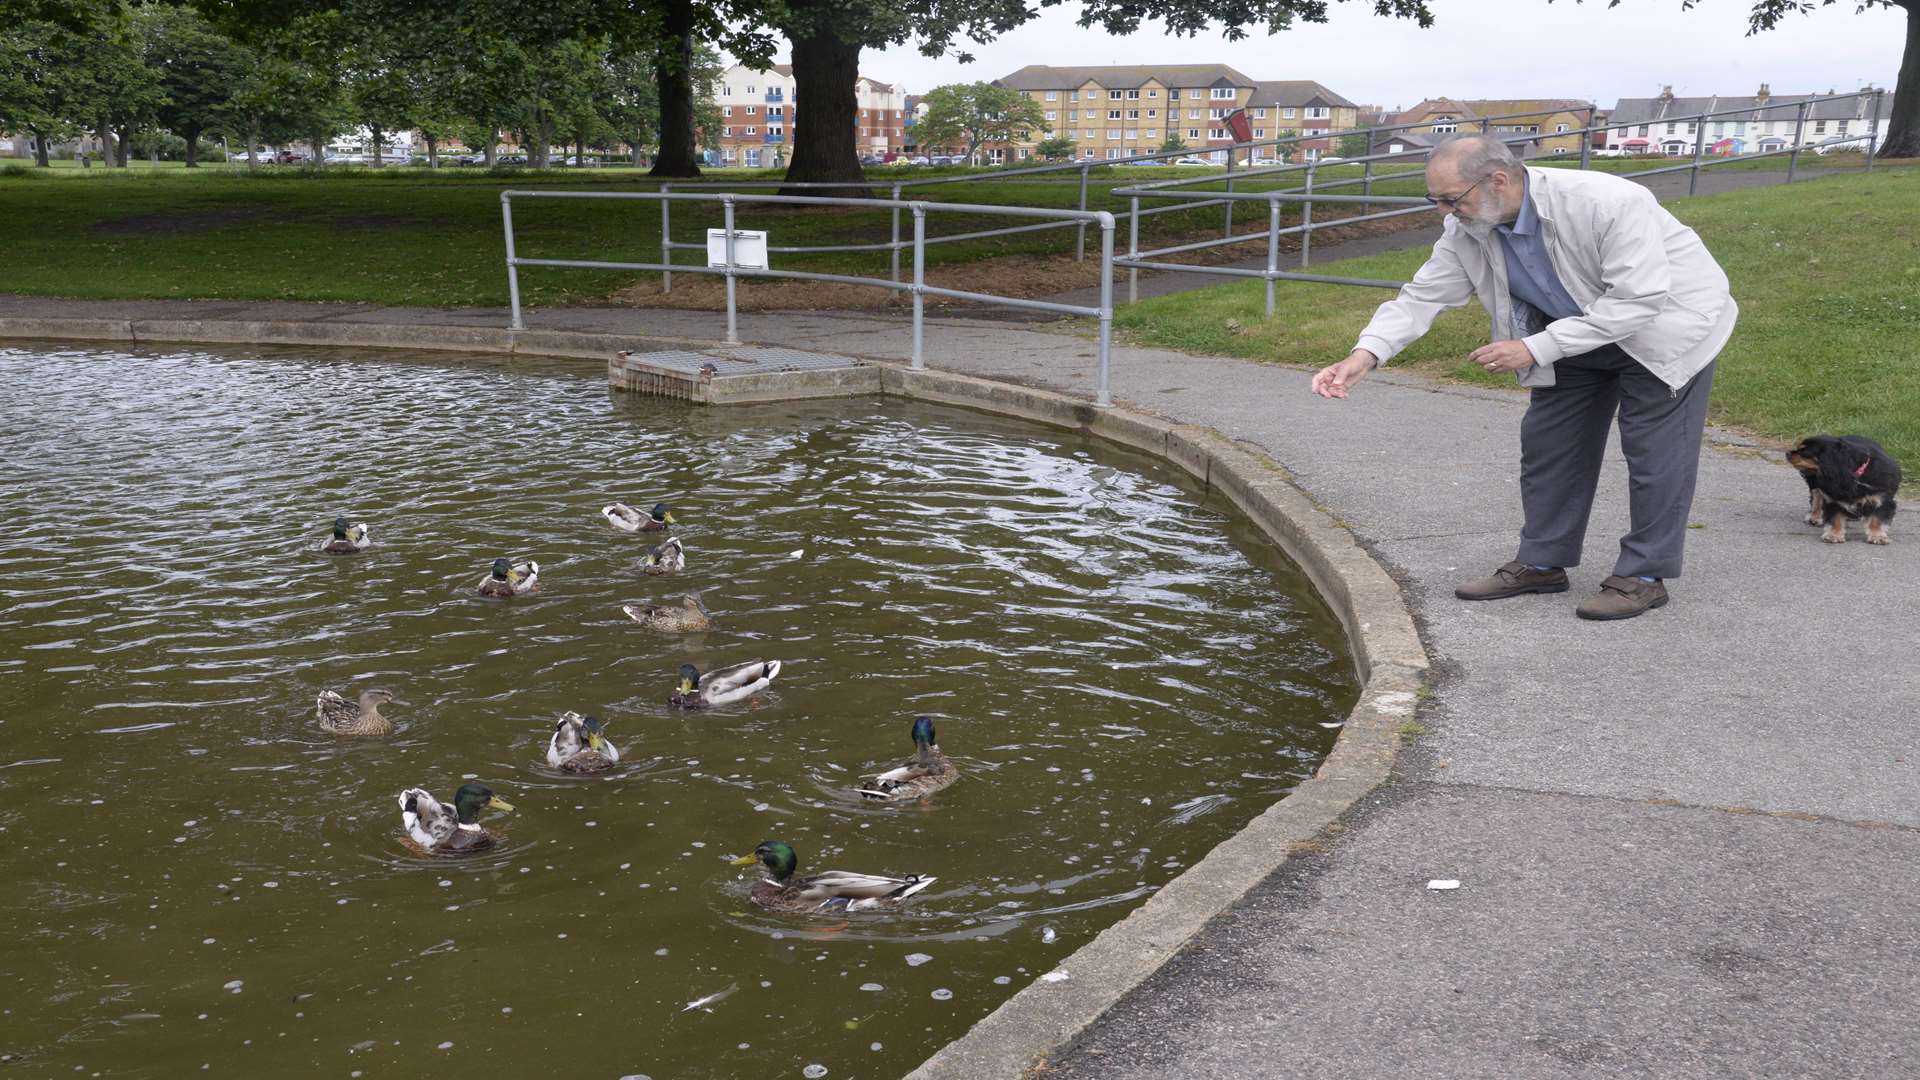 A councillor wants people to stop feeding ducks bread as it is attracting seagulls. Picture: Chris Davey